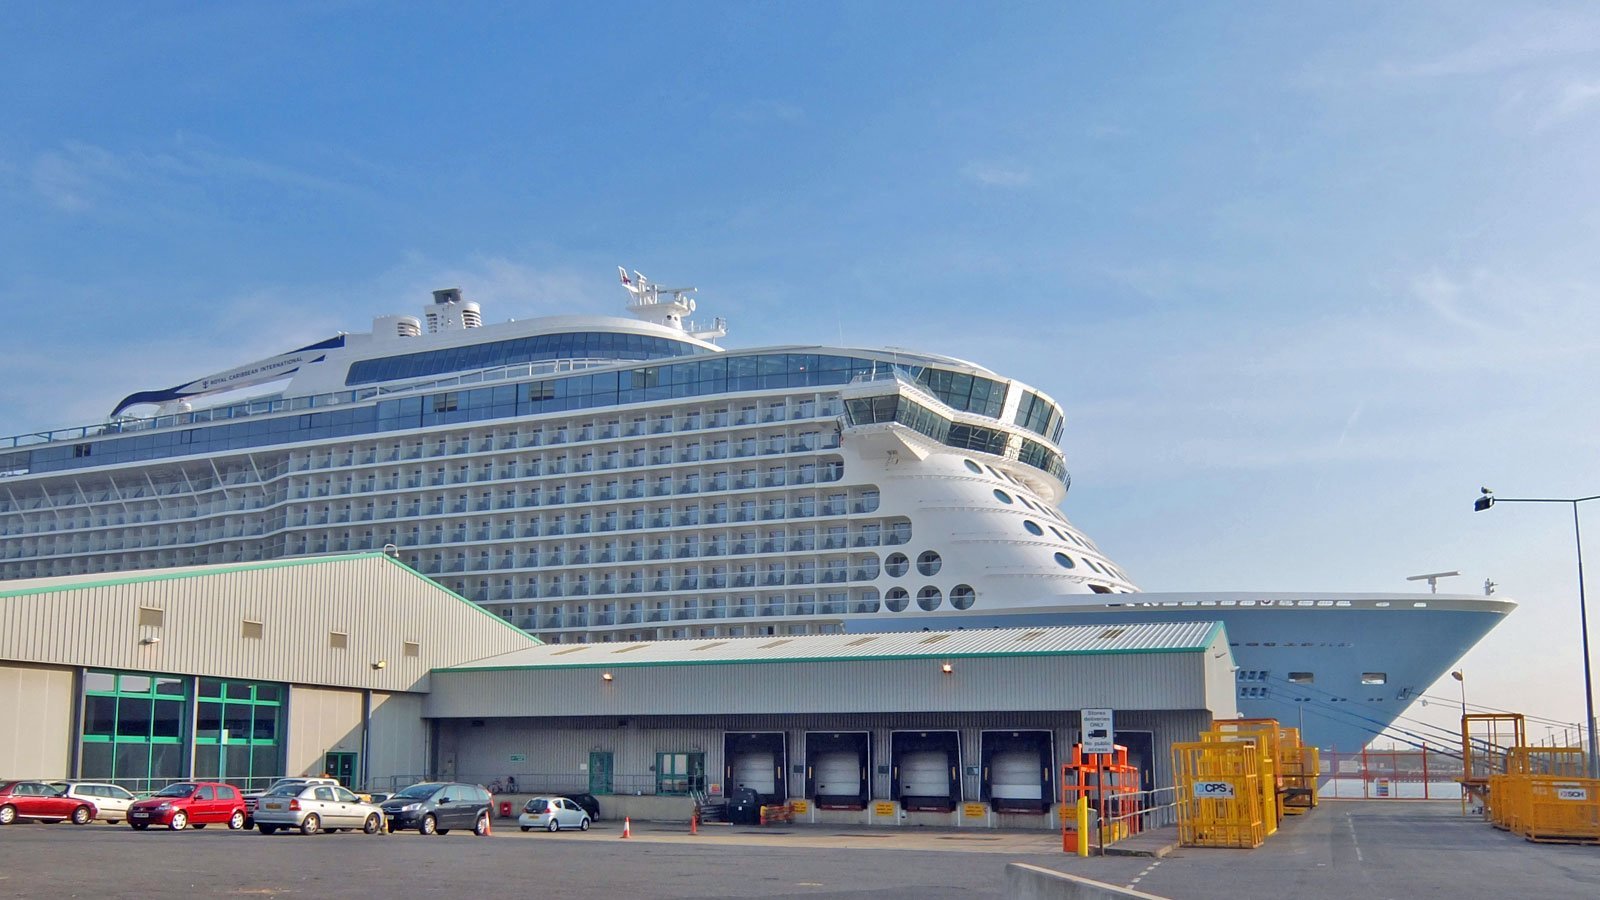 The Anthem of the Seas cruise ship can carry more than 4,000 passengers and has a crew of about 1,600.